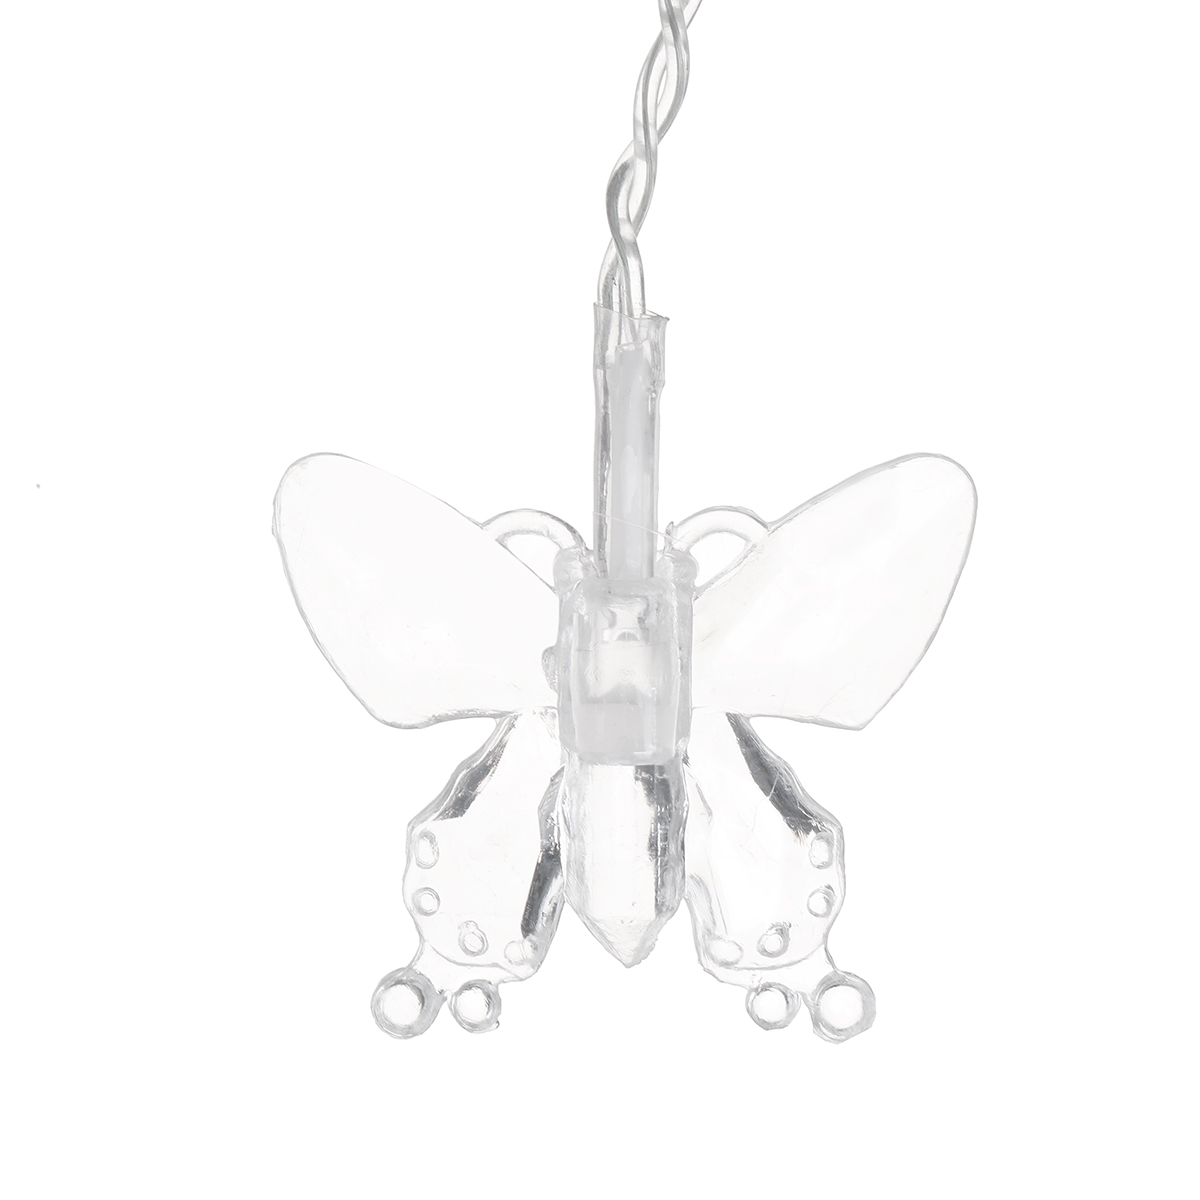 200X150cm-LED-LoveButterfly-Shape-Curtain-Lights-String-USB-Powered-Waterproof-Wall-Light-Hanging-Fa-1704556-11